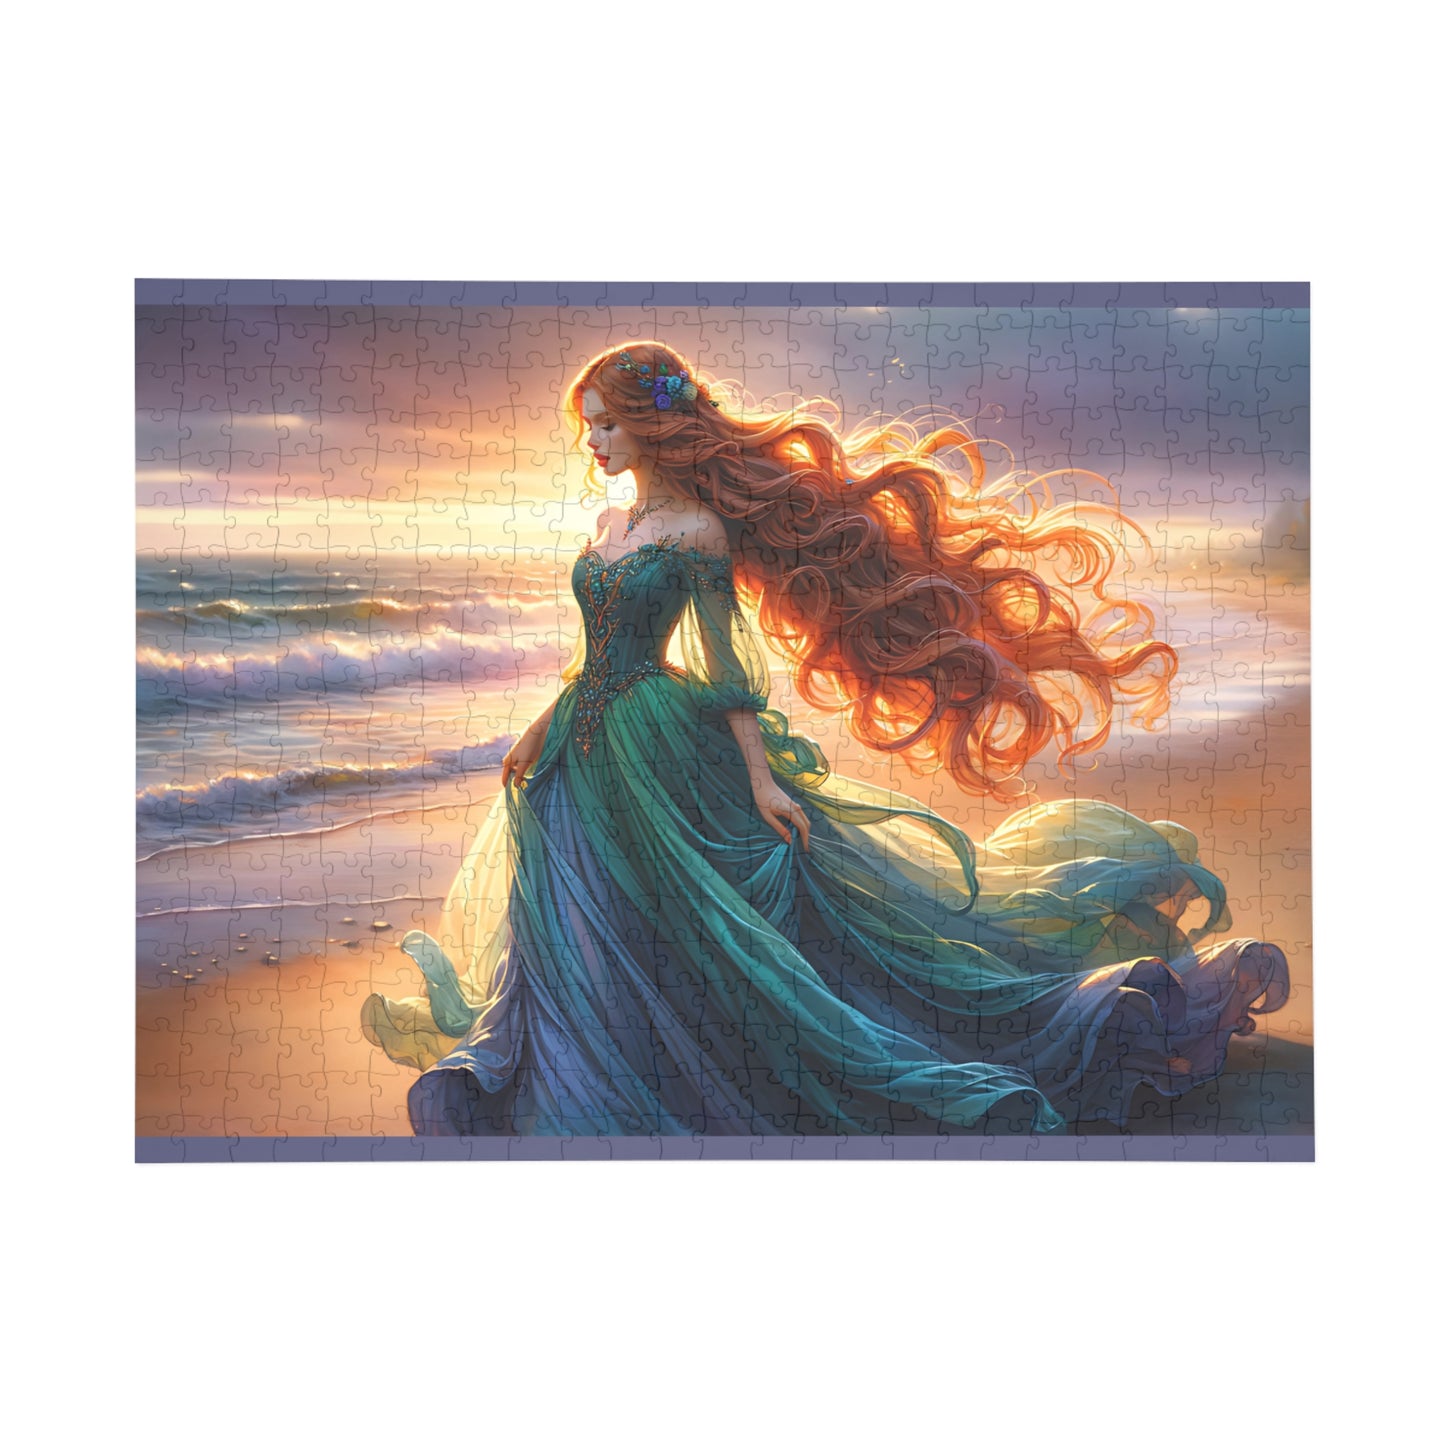 Once Upon A Fantasy - On The Shore 1000-Piece Puzzle